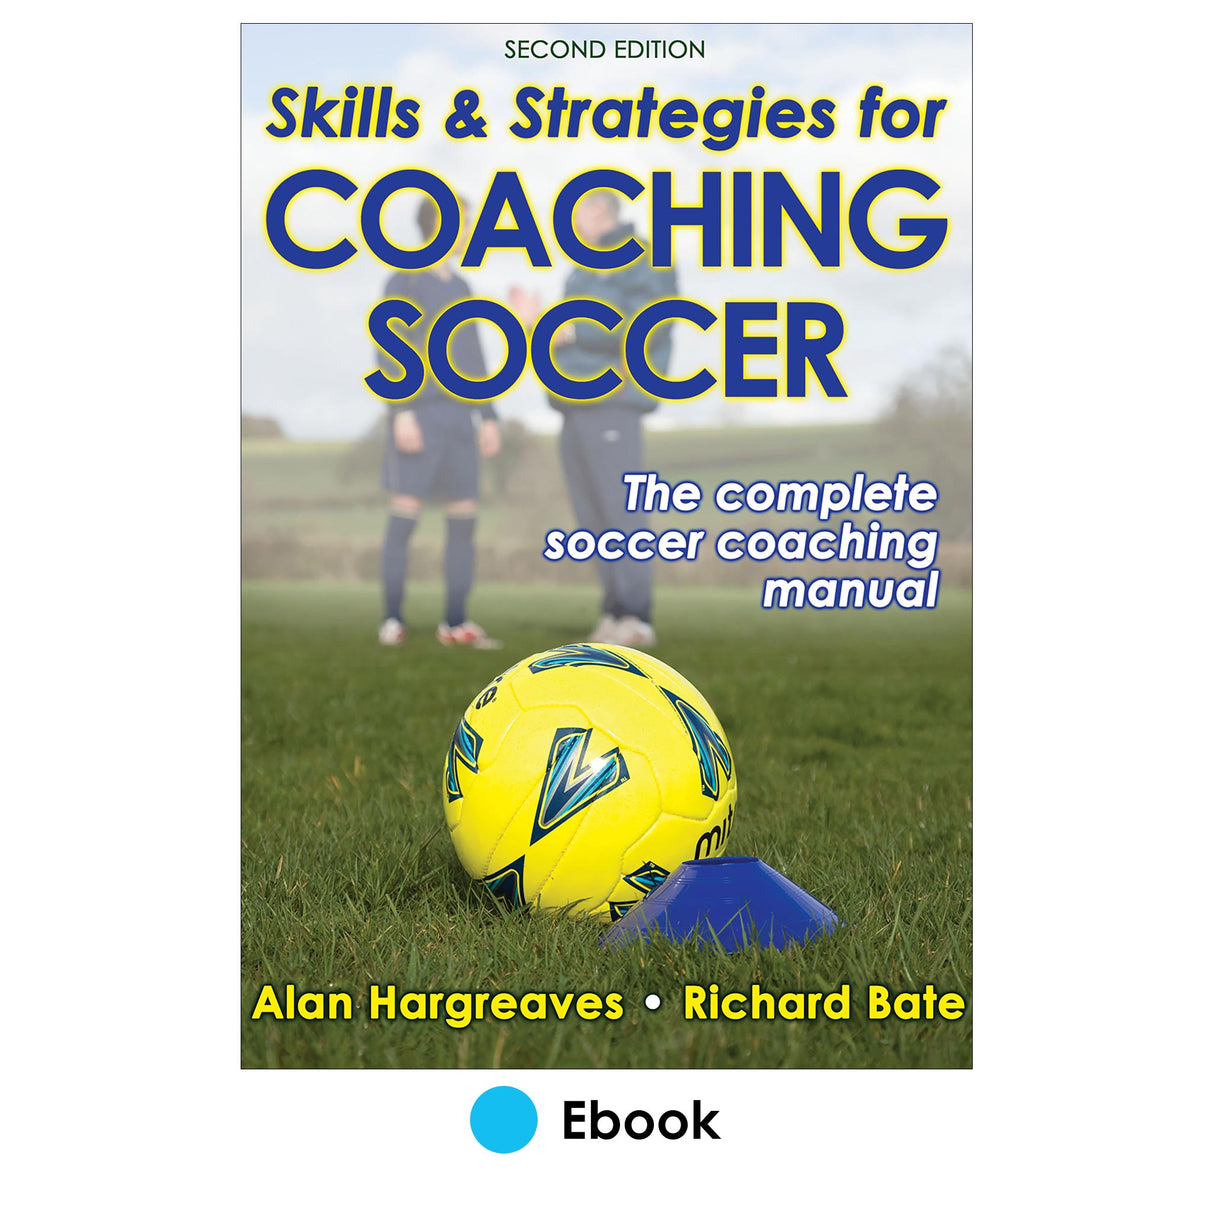 Skills & Strategies for Coaching Soccer 2nd Edition PDF